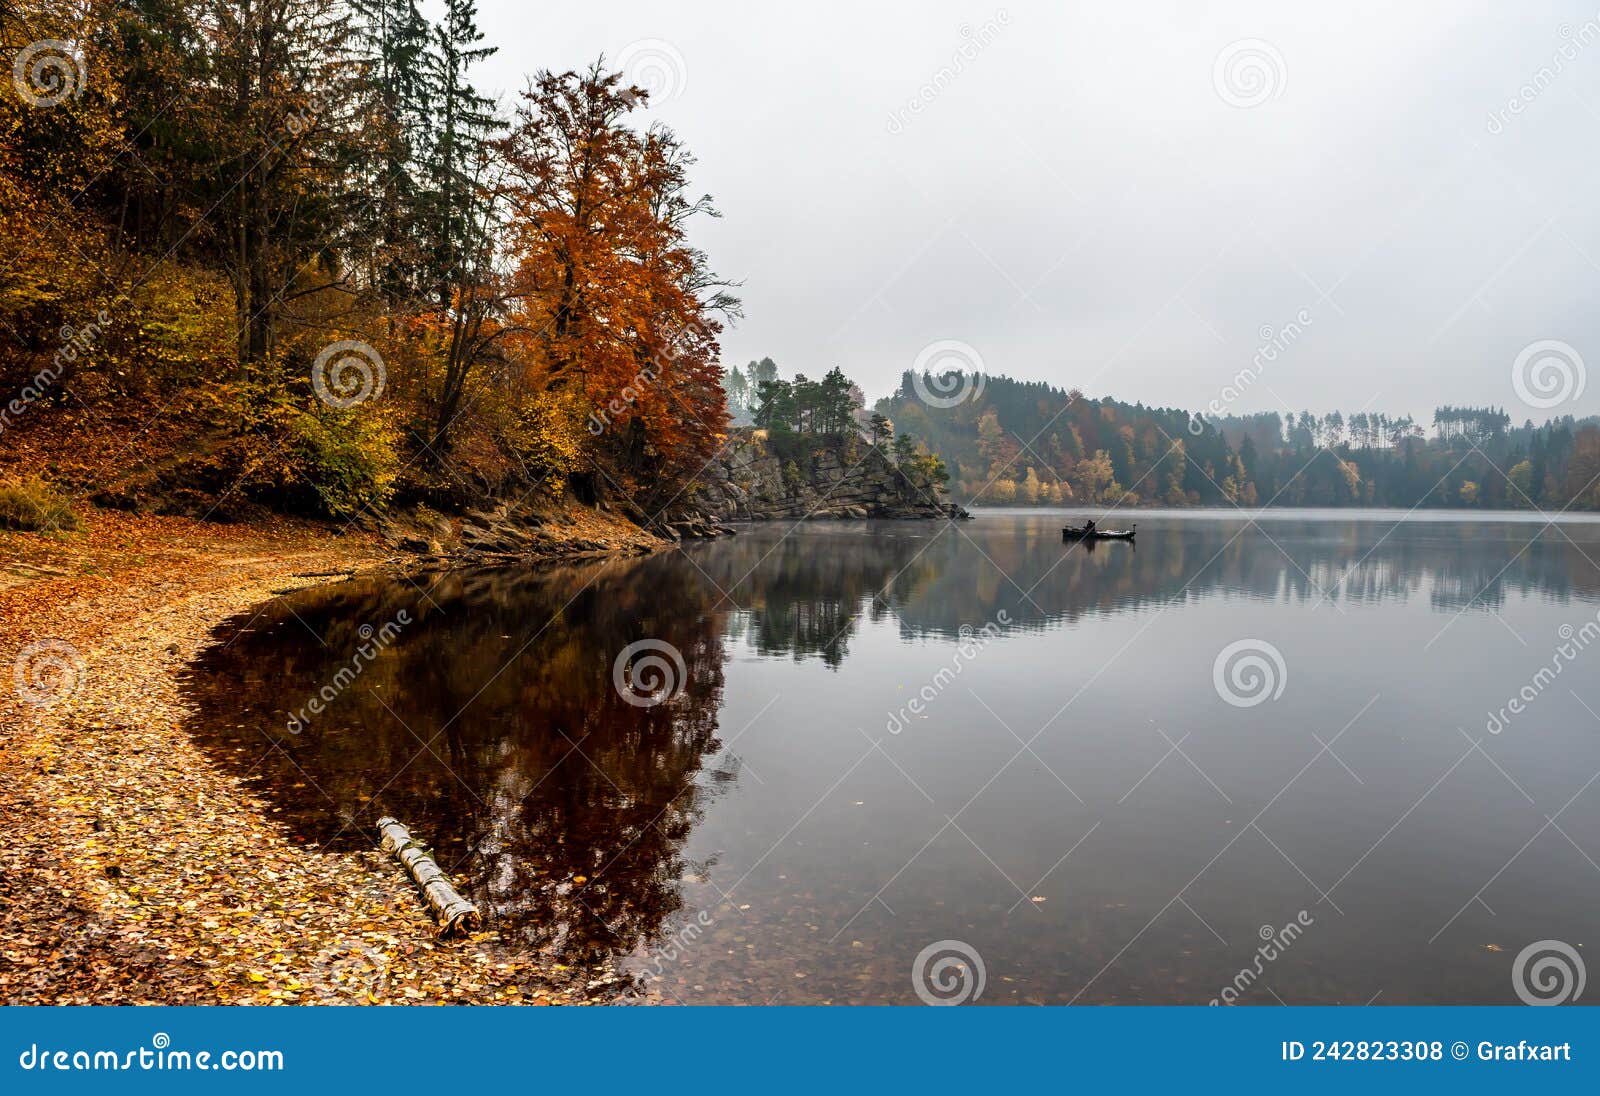 Foggy Landscape With Fishermans Boat On Calm Lake And Autumnal Forest